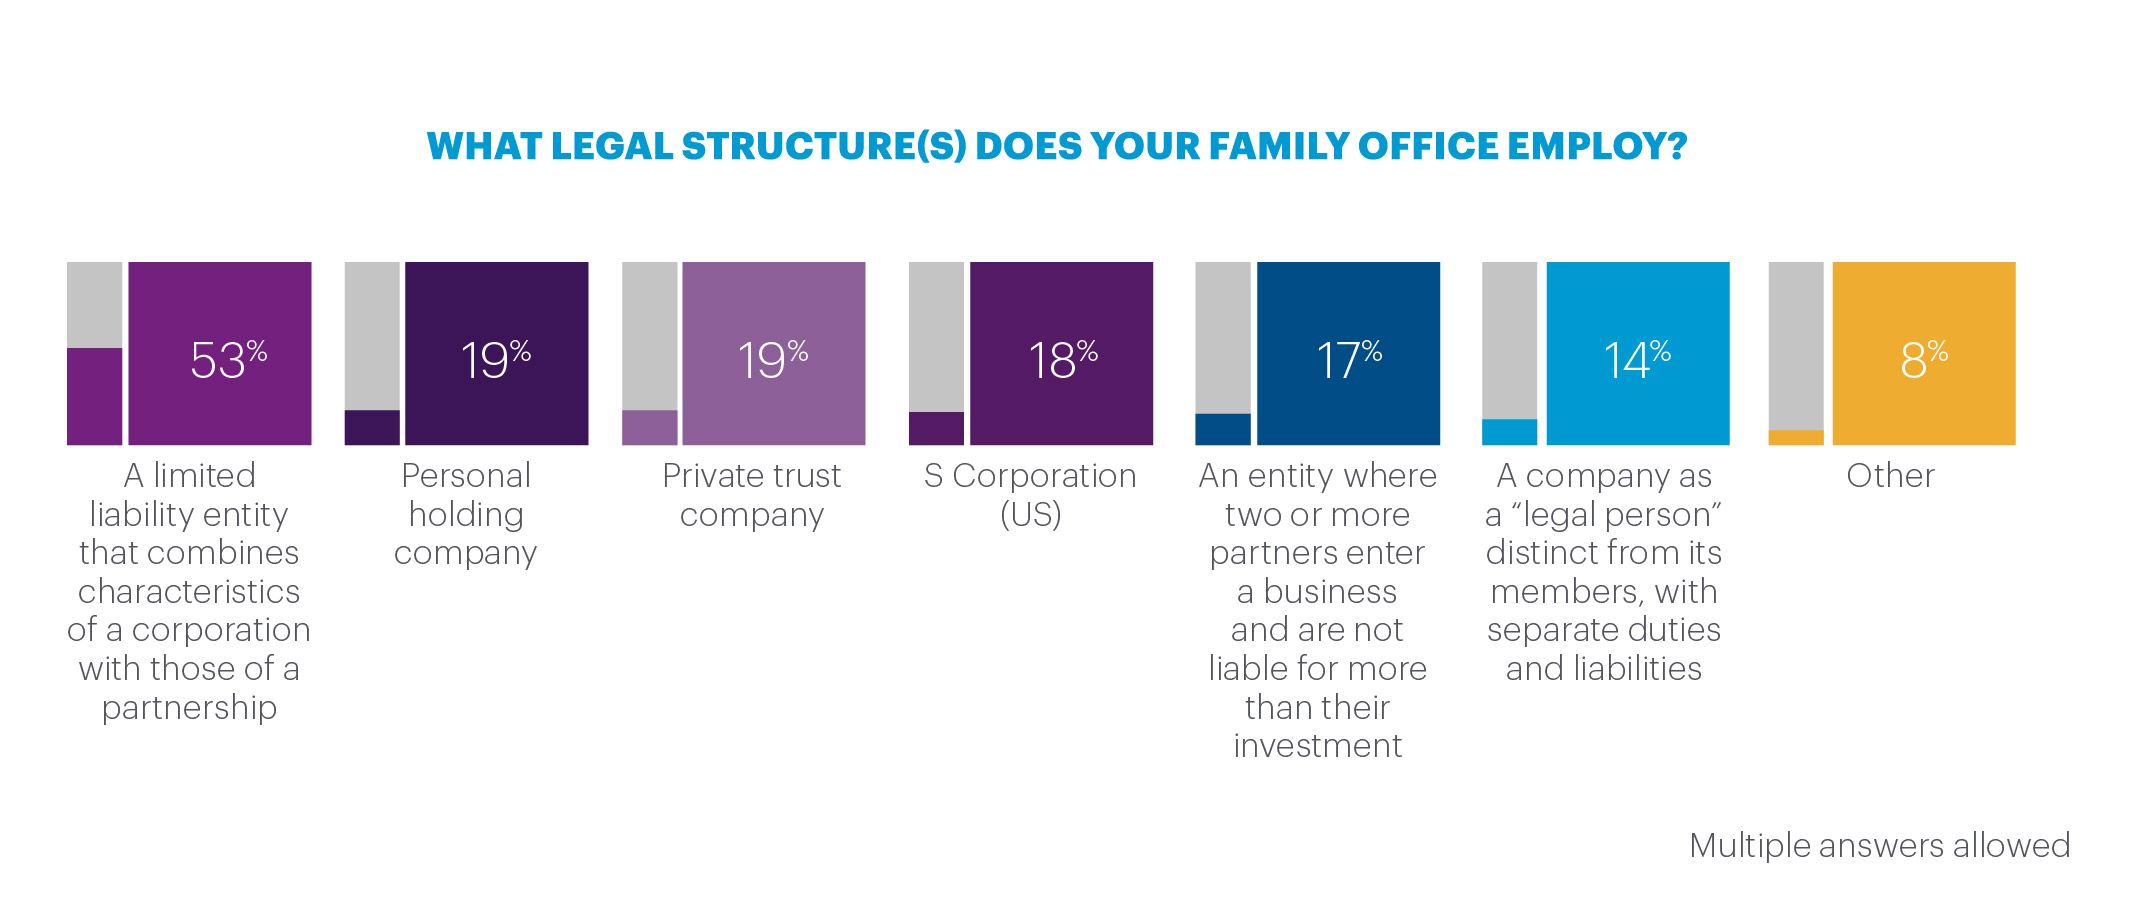 Legal structures family offices employ in percentages